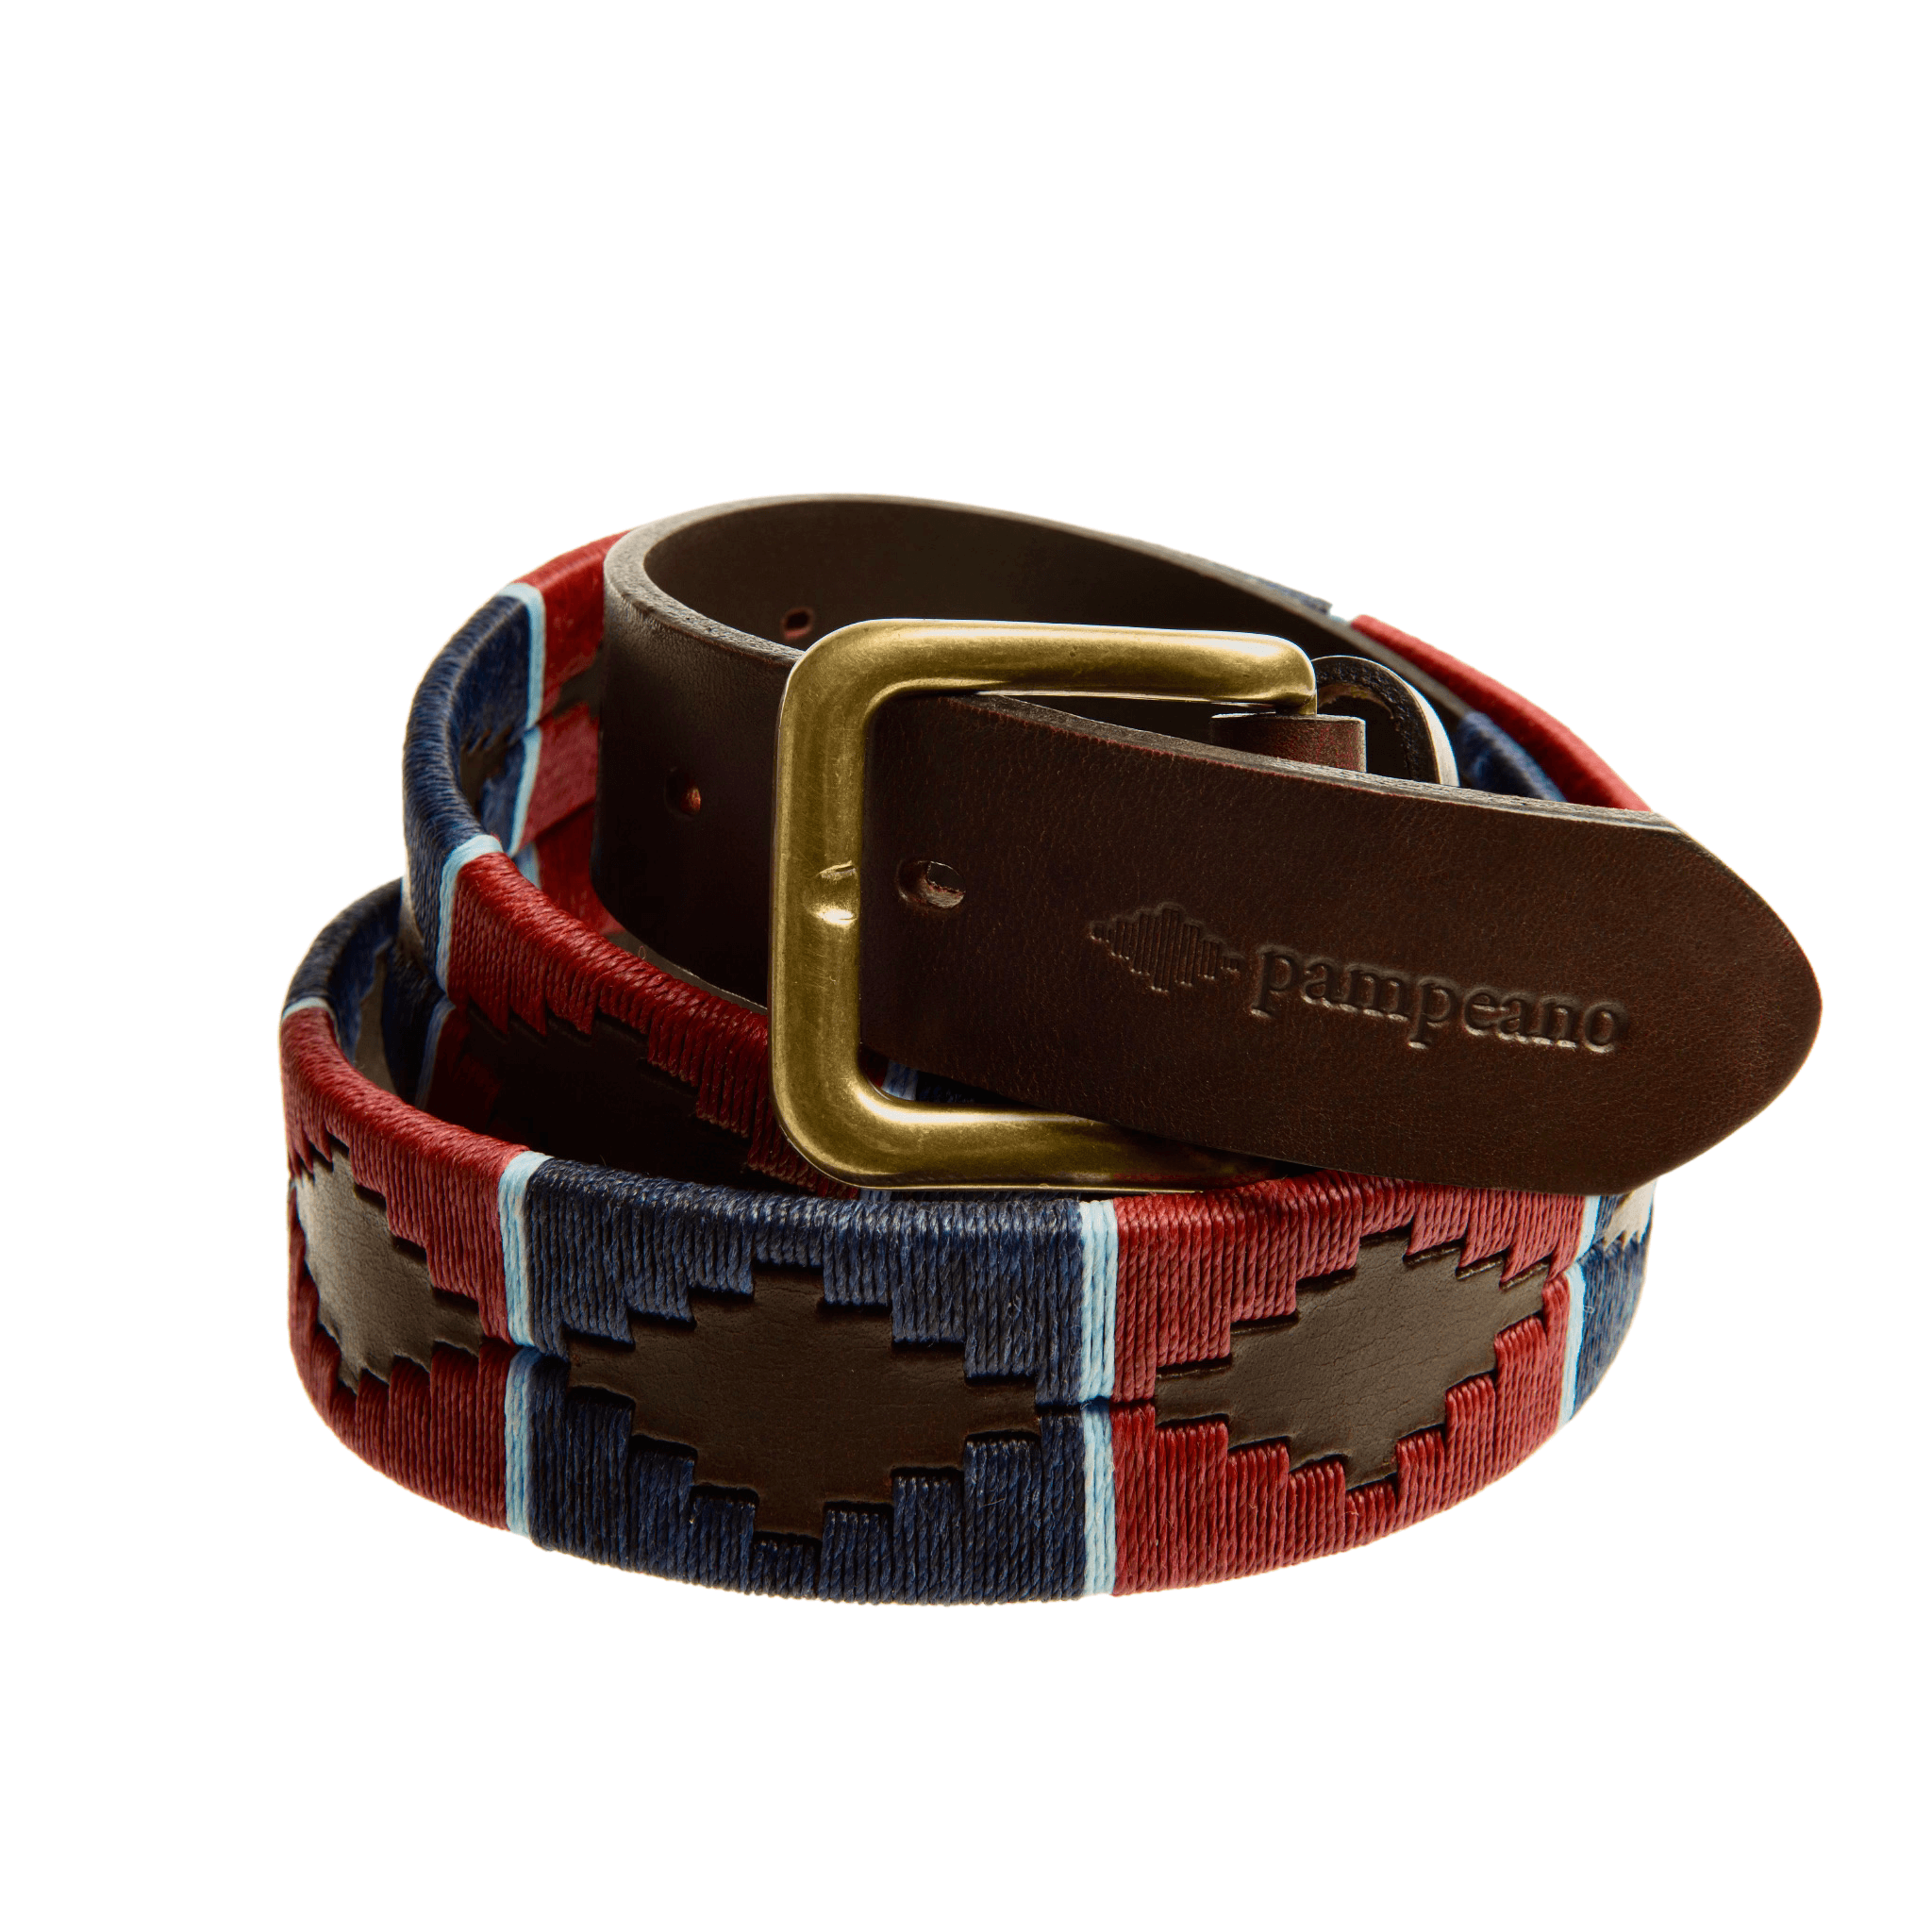 The Country Direct & Pampeano Royal Air Force Leather Polo Belt.